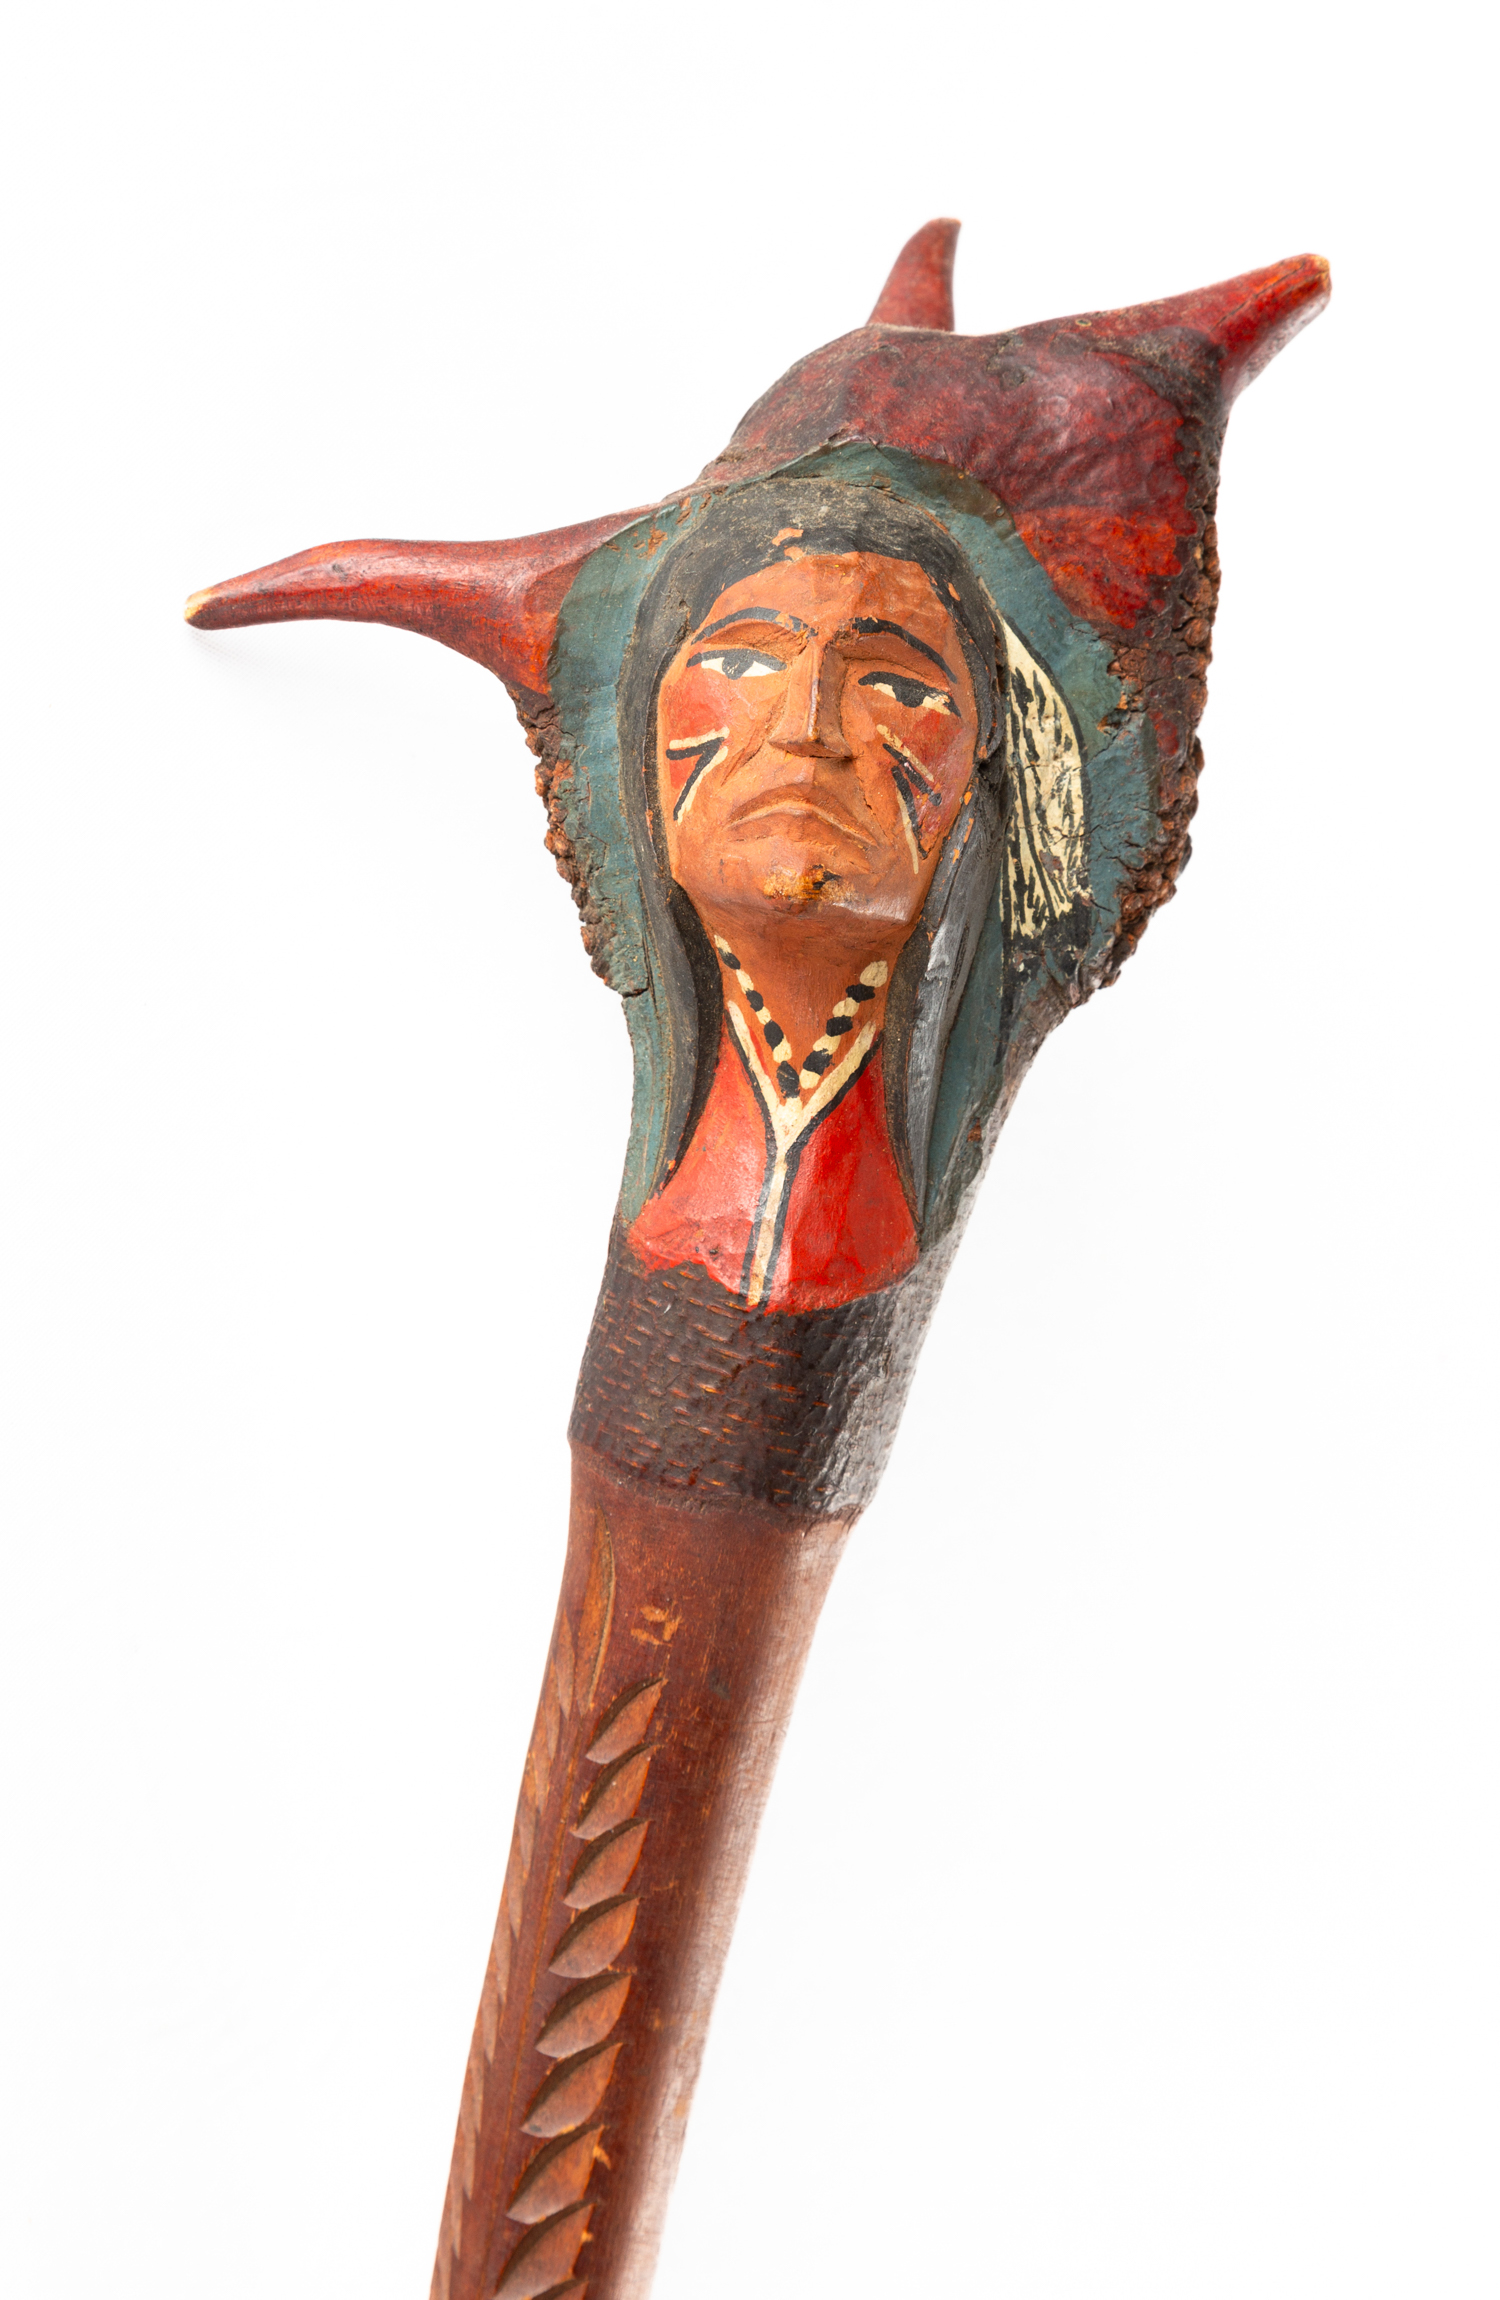 PENOBSCOT WAR CLUB Carved and painted